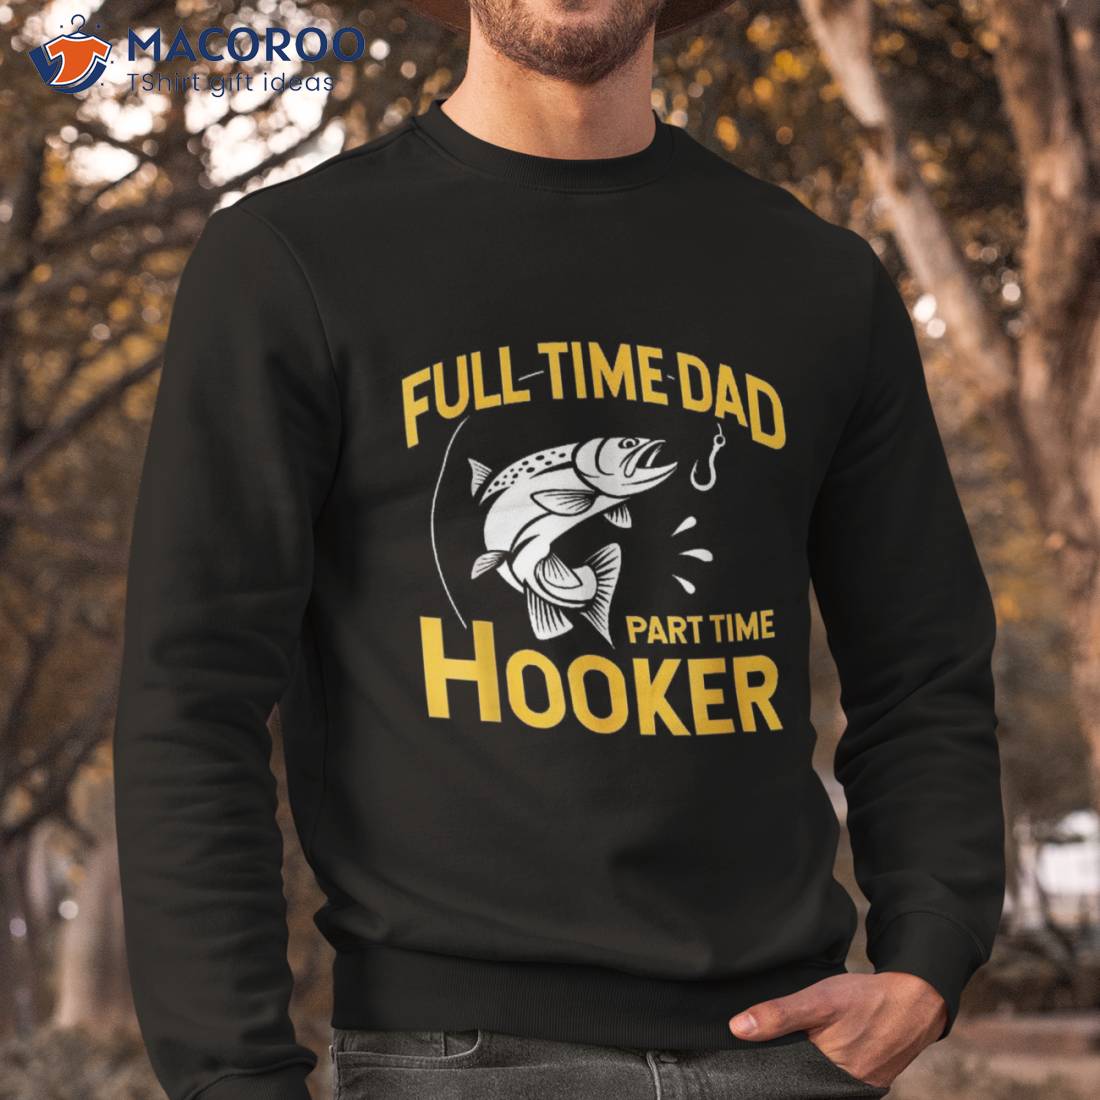 https://images.macoroo.com/wp-content/uploads/2023/06/full-time-dad-part-hooker-funny-father-s-day-fishing-shirt-sweatshirt.jpg